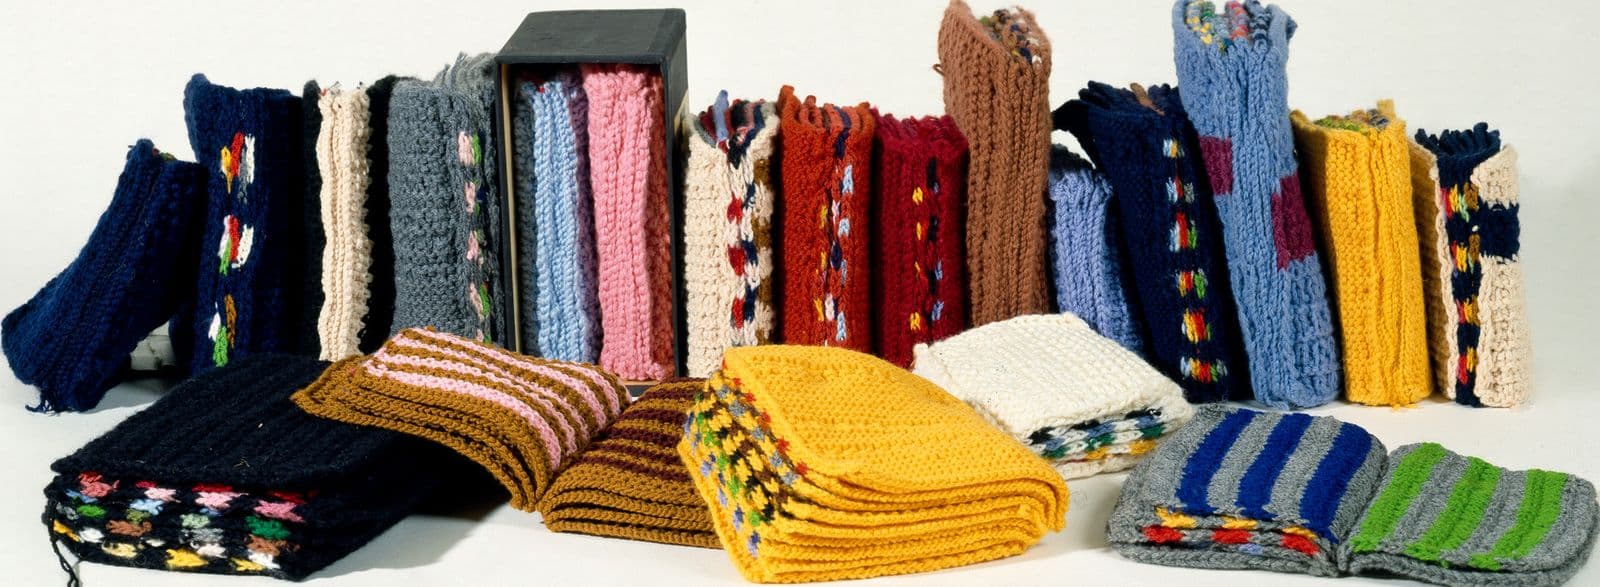 20 multicoloured knitted books in a line